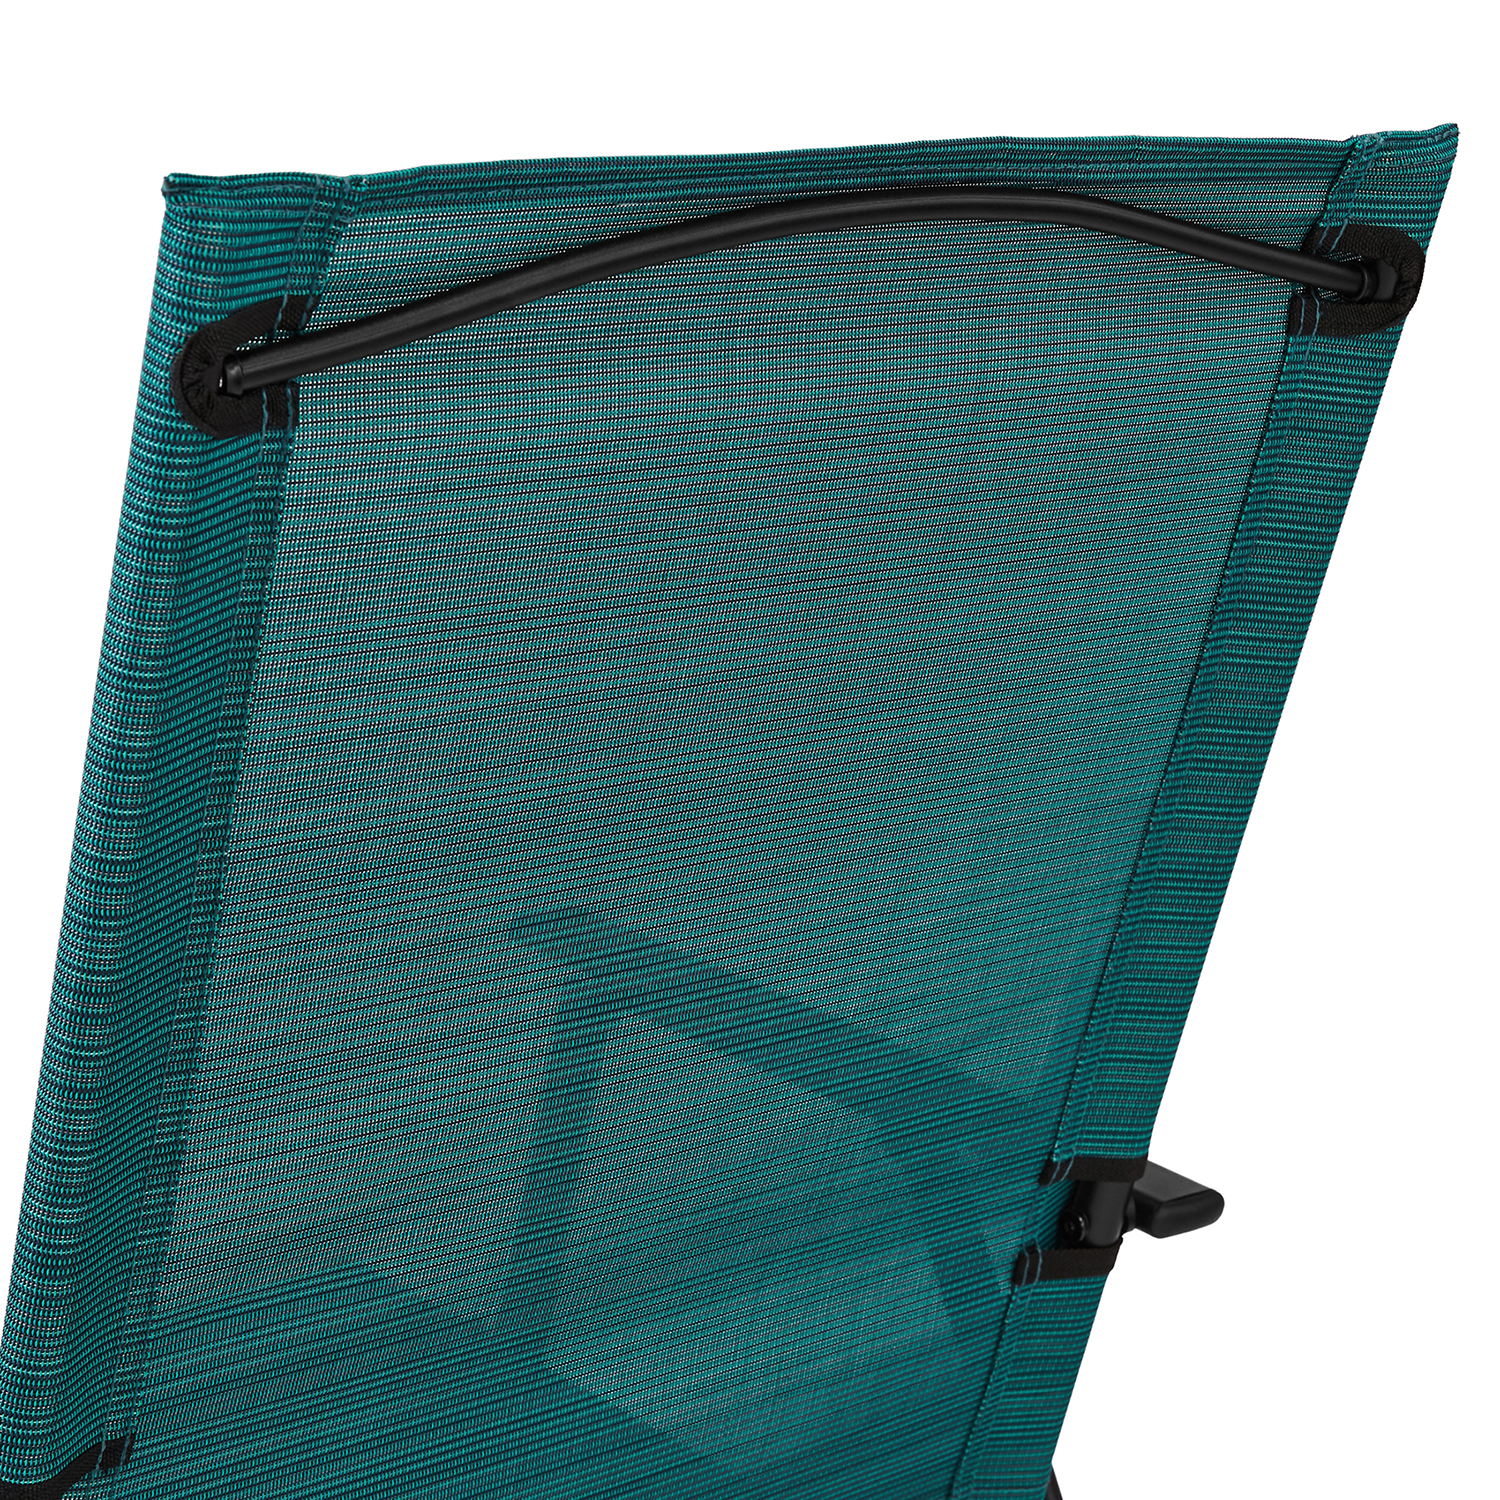 Mainstays Greyson Steel and Sling Folding Outdoor Patio Armchair - Set of 2, Teal - image 2 of 8